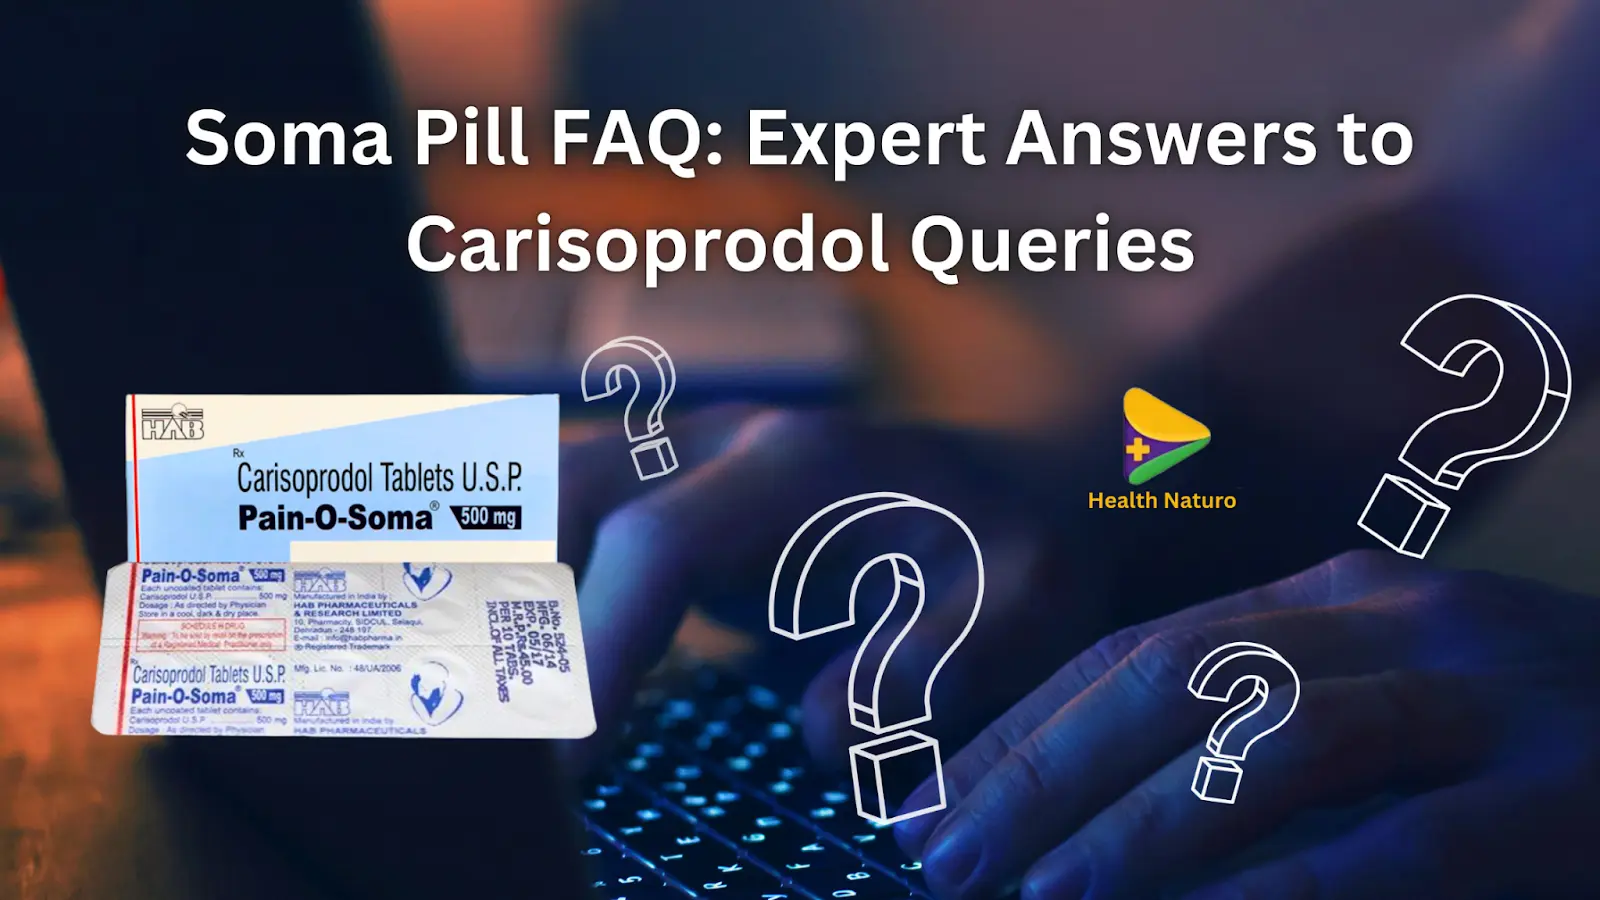 Soma Pill FAQ: Expert Answers to Carisoprodol Queries